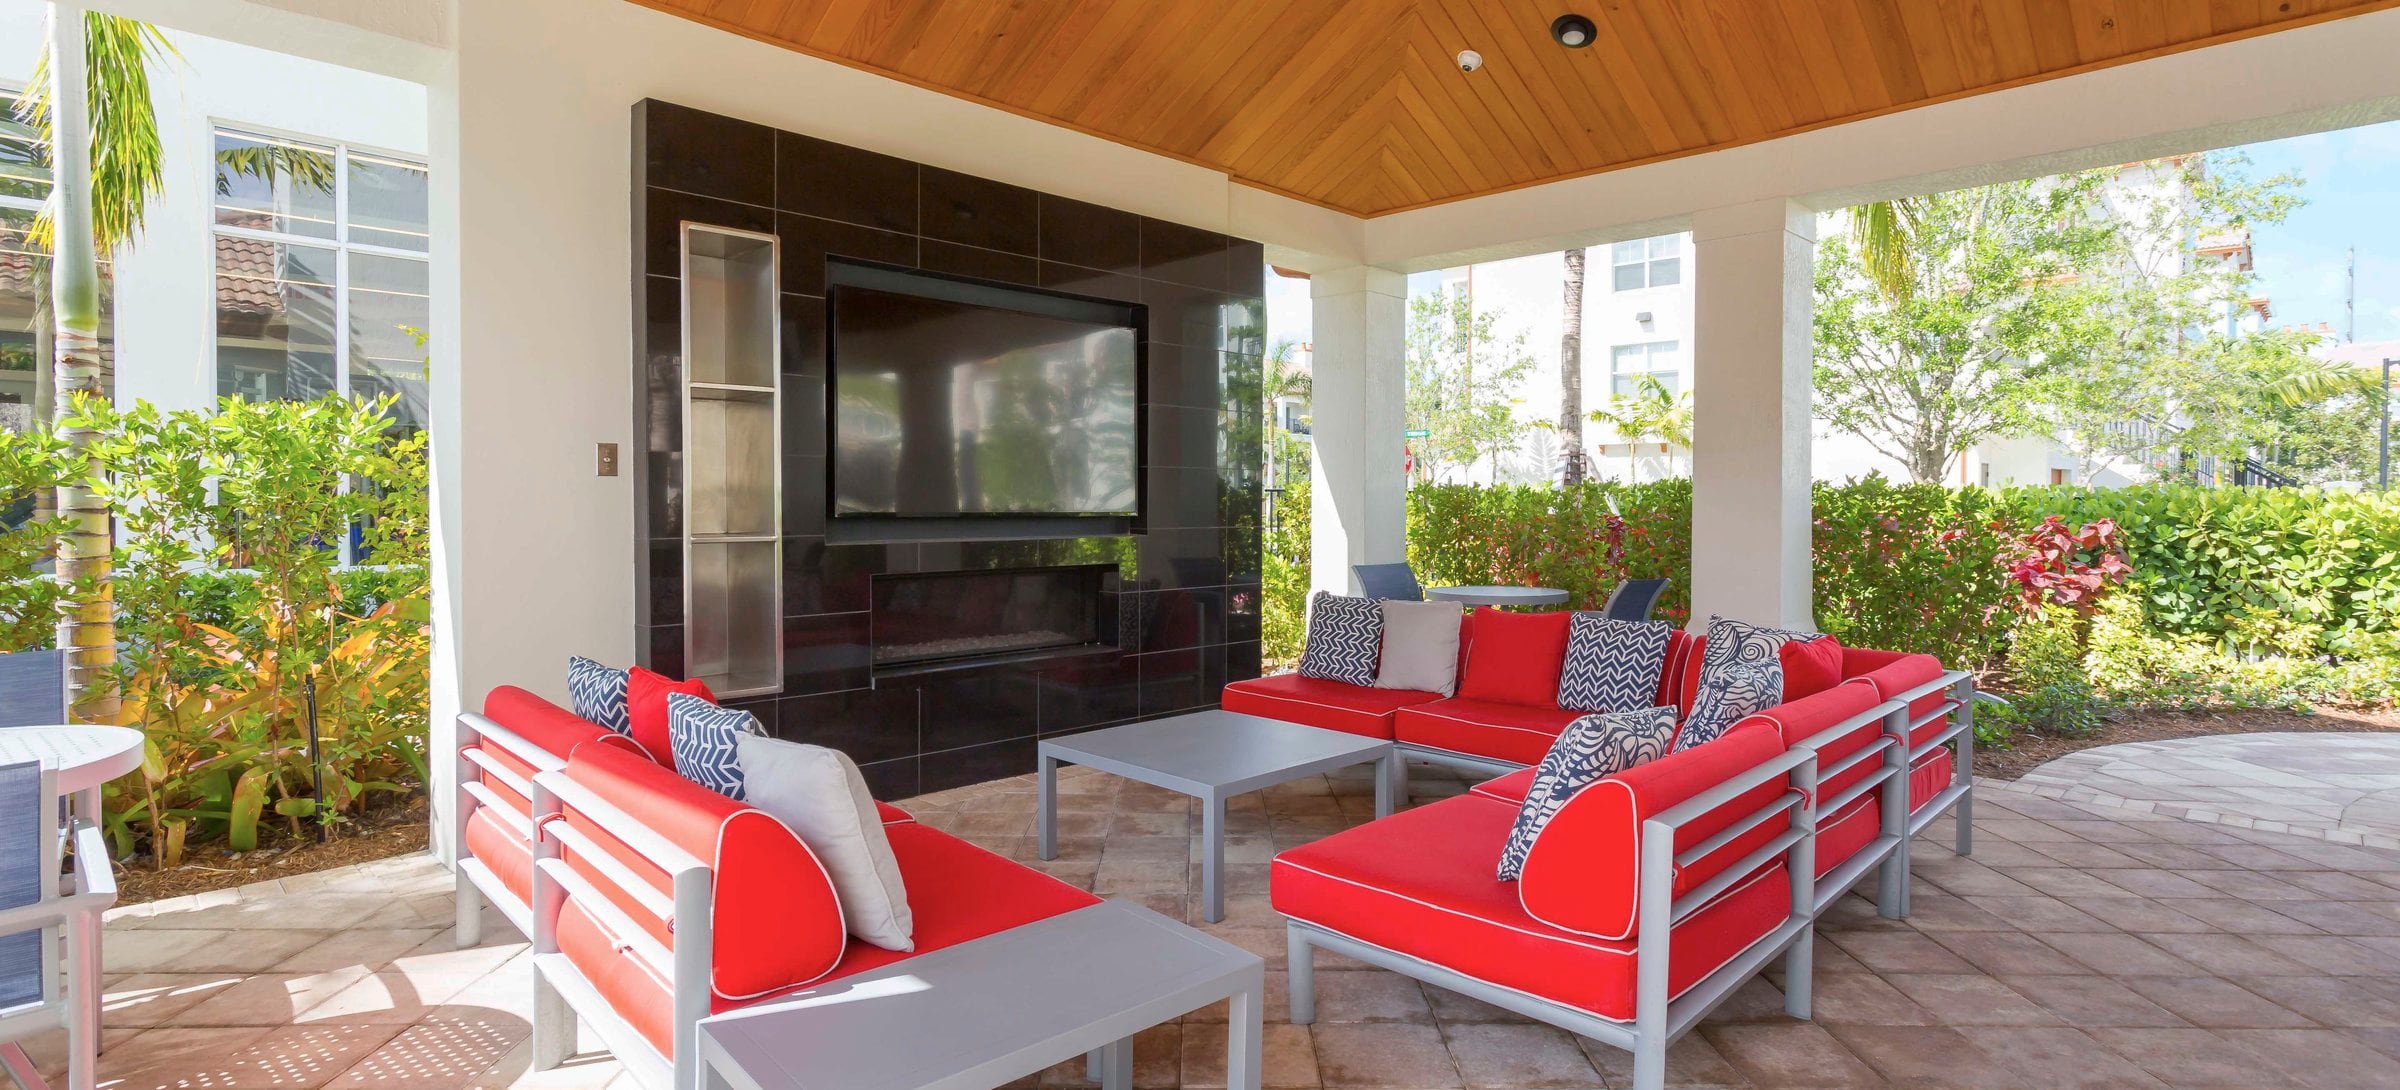 Outdoor seating area with TV